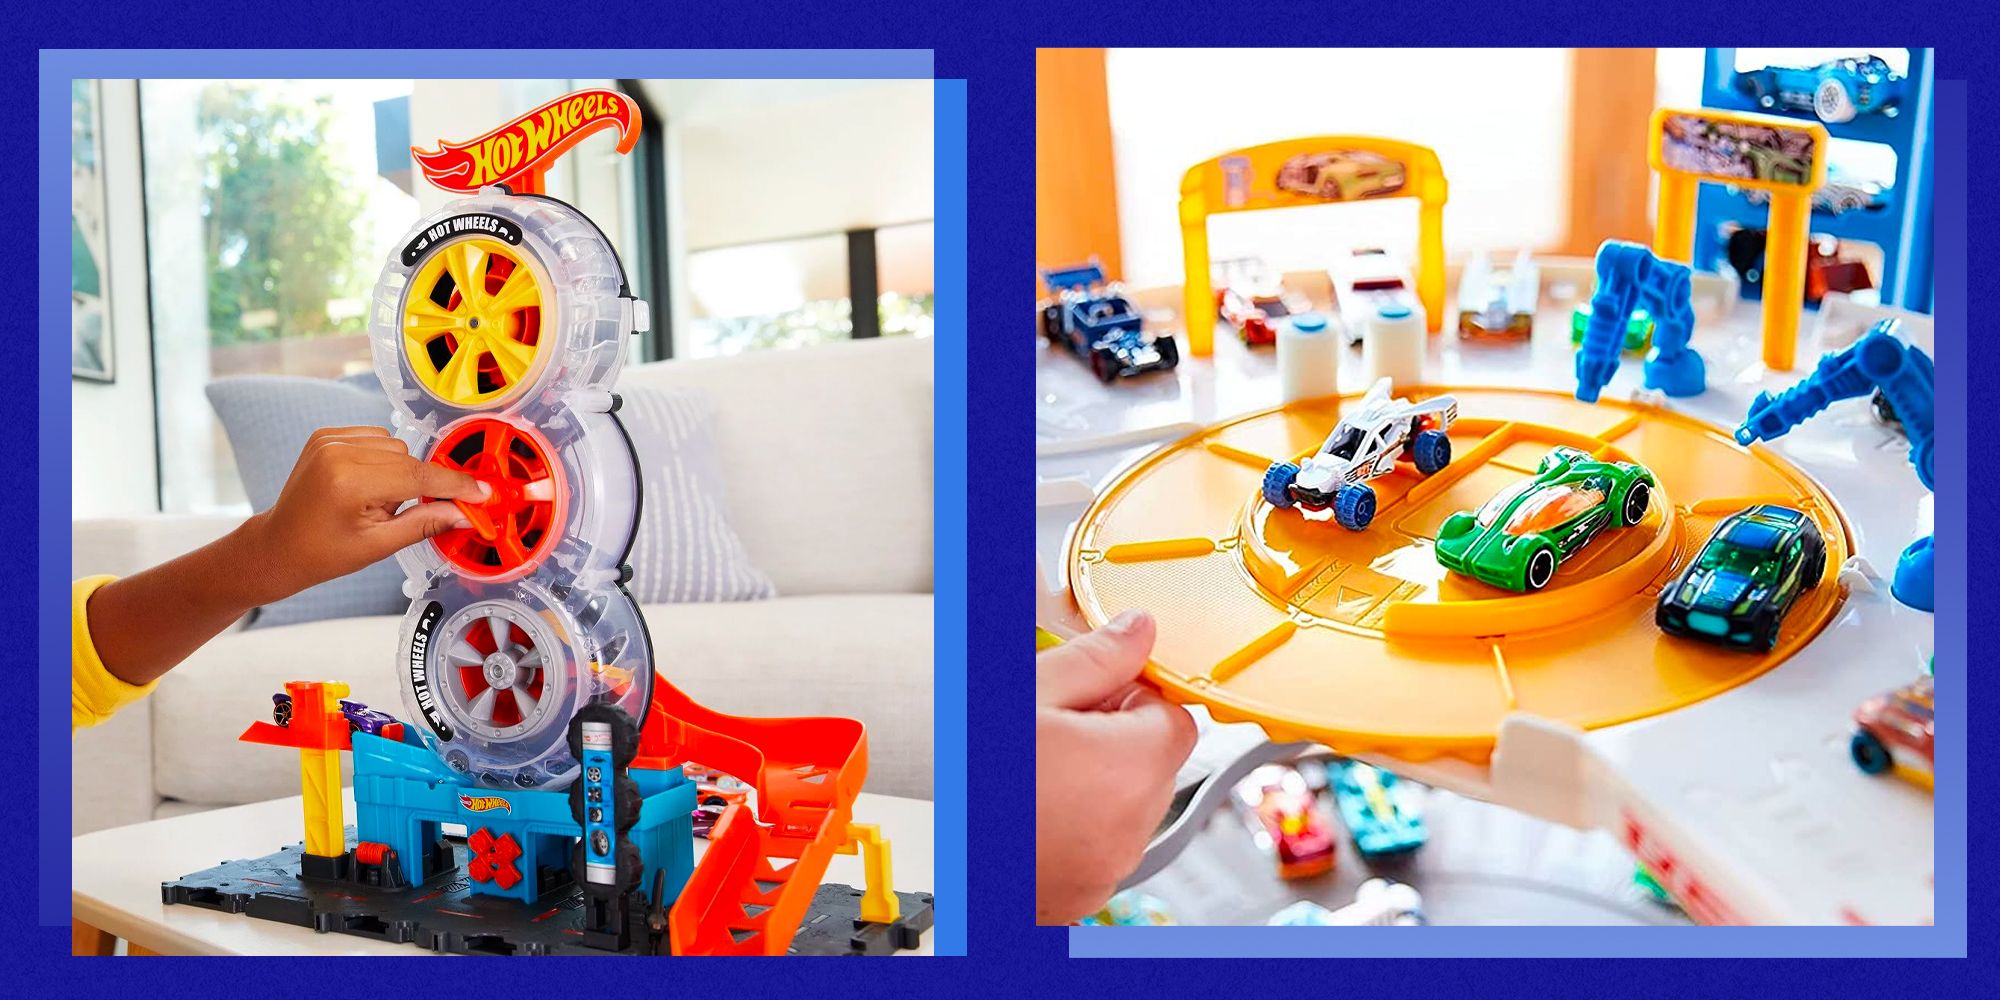 13 Best Hot Wheels Sets for Kids in 2022 - Hot Wheels Toys